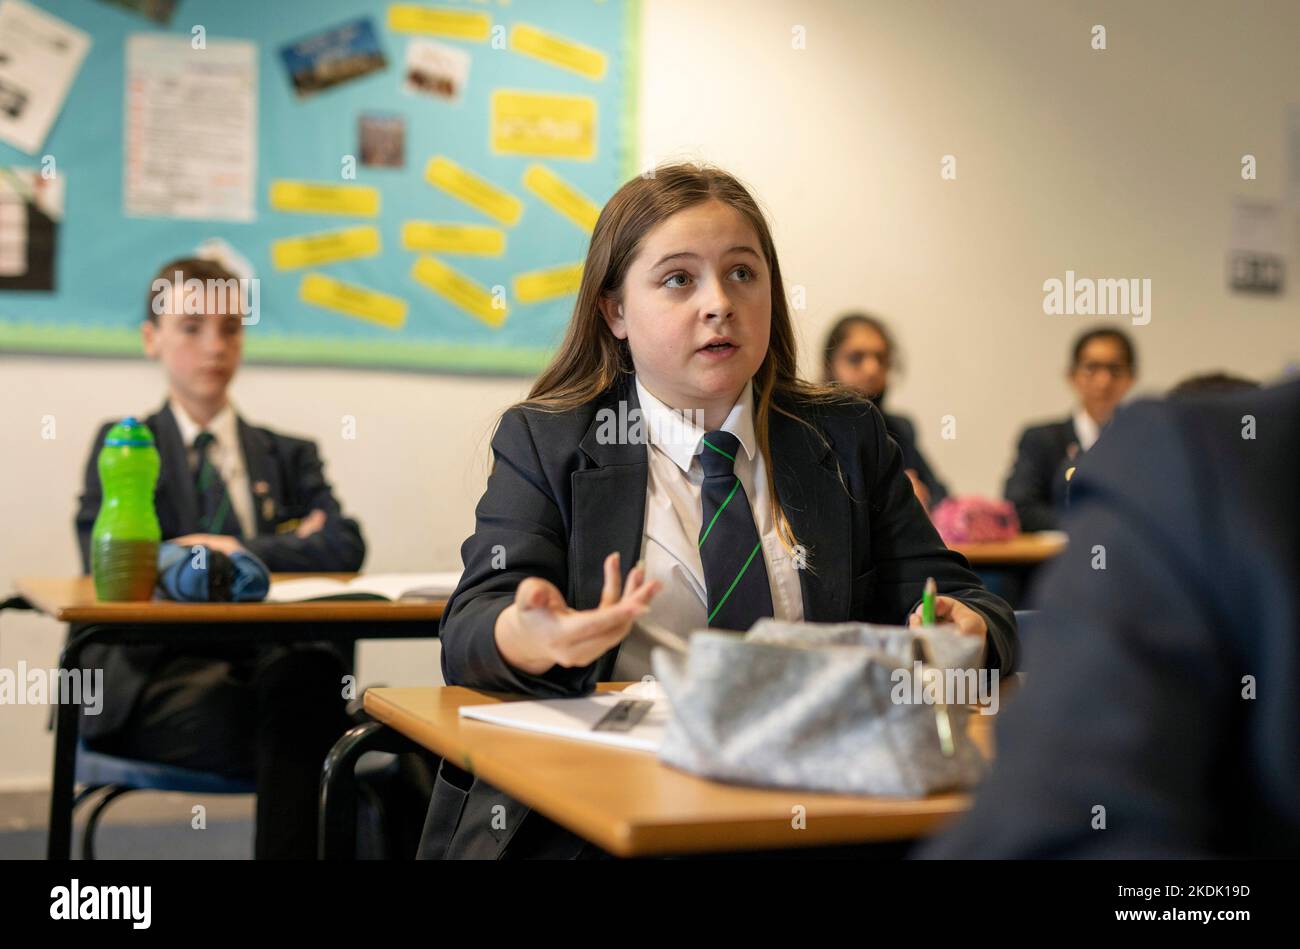 A pupil at a secondary school in the UK makes a point during a discussion Stock Photo